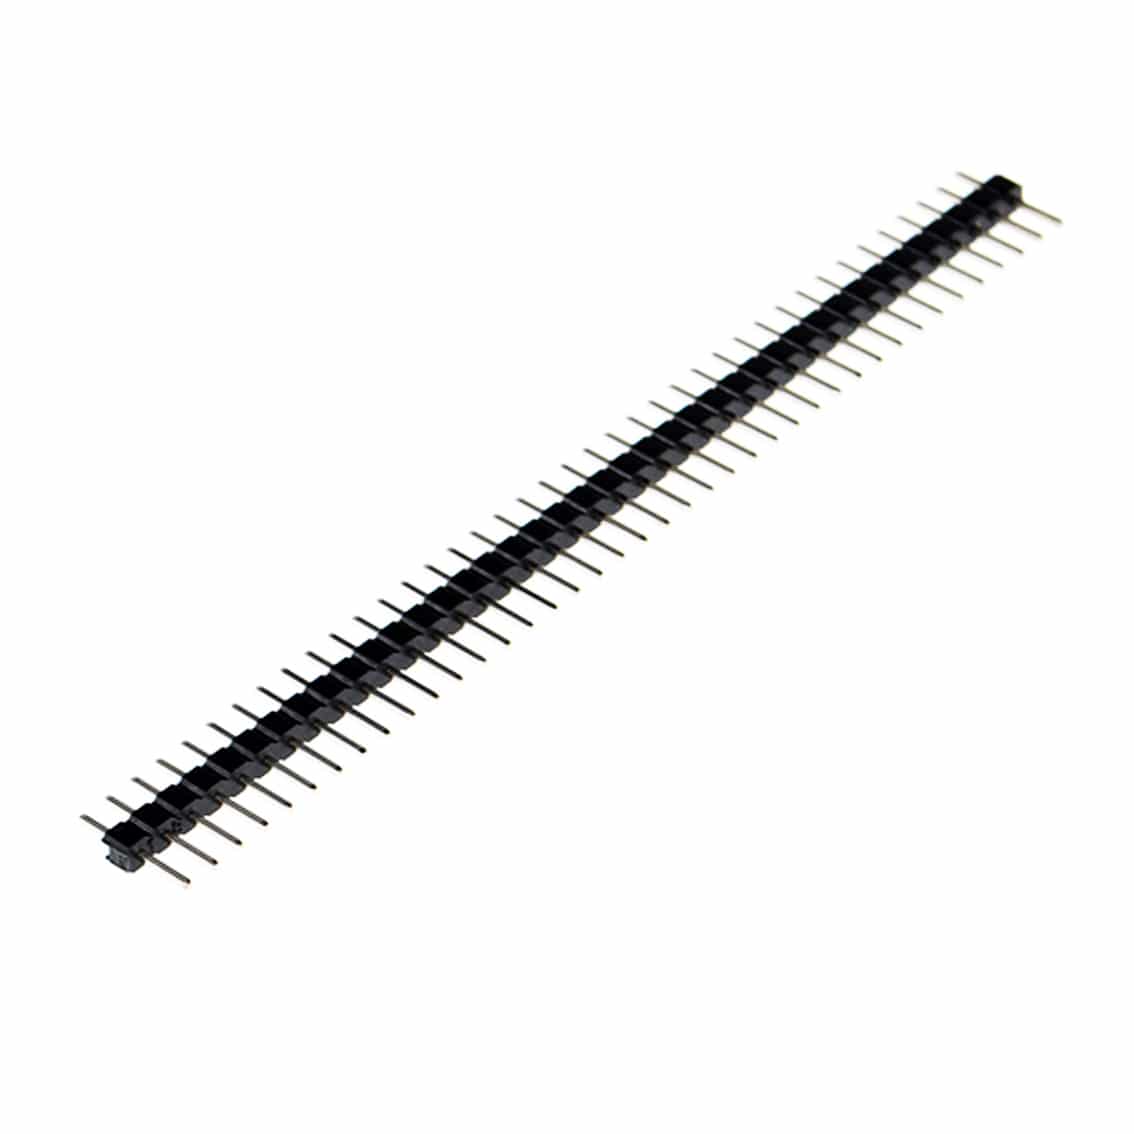 2.0mm Pitch 40 Way Straight Male Pin Header - Pack of 5